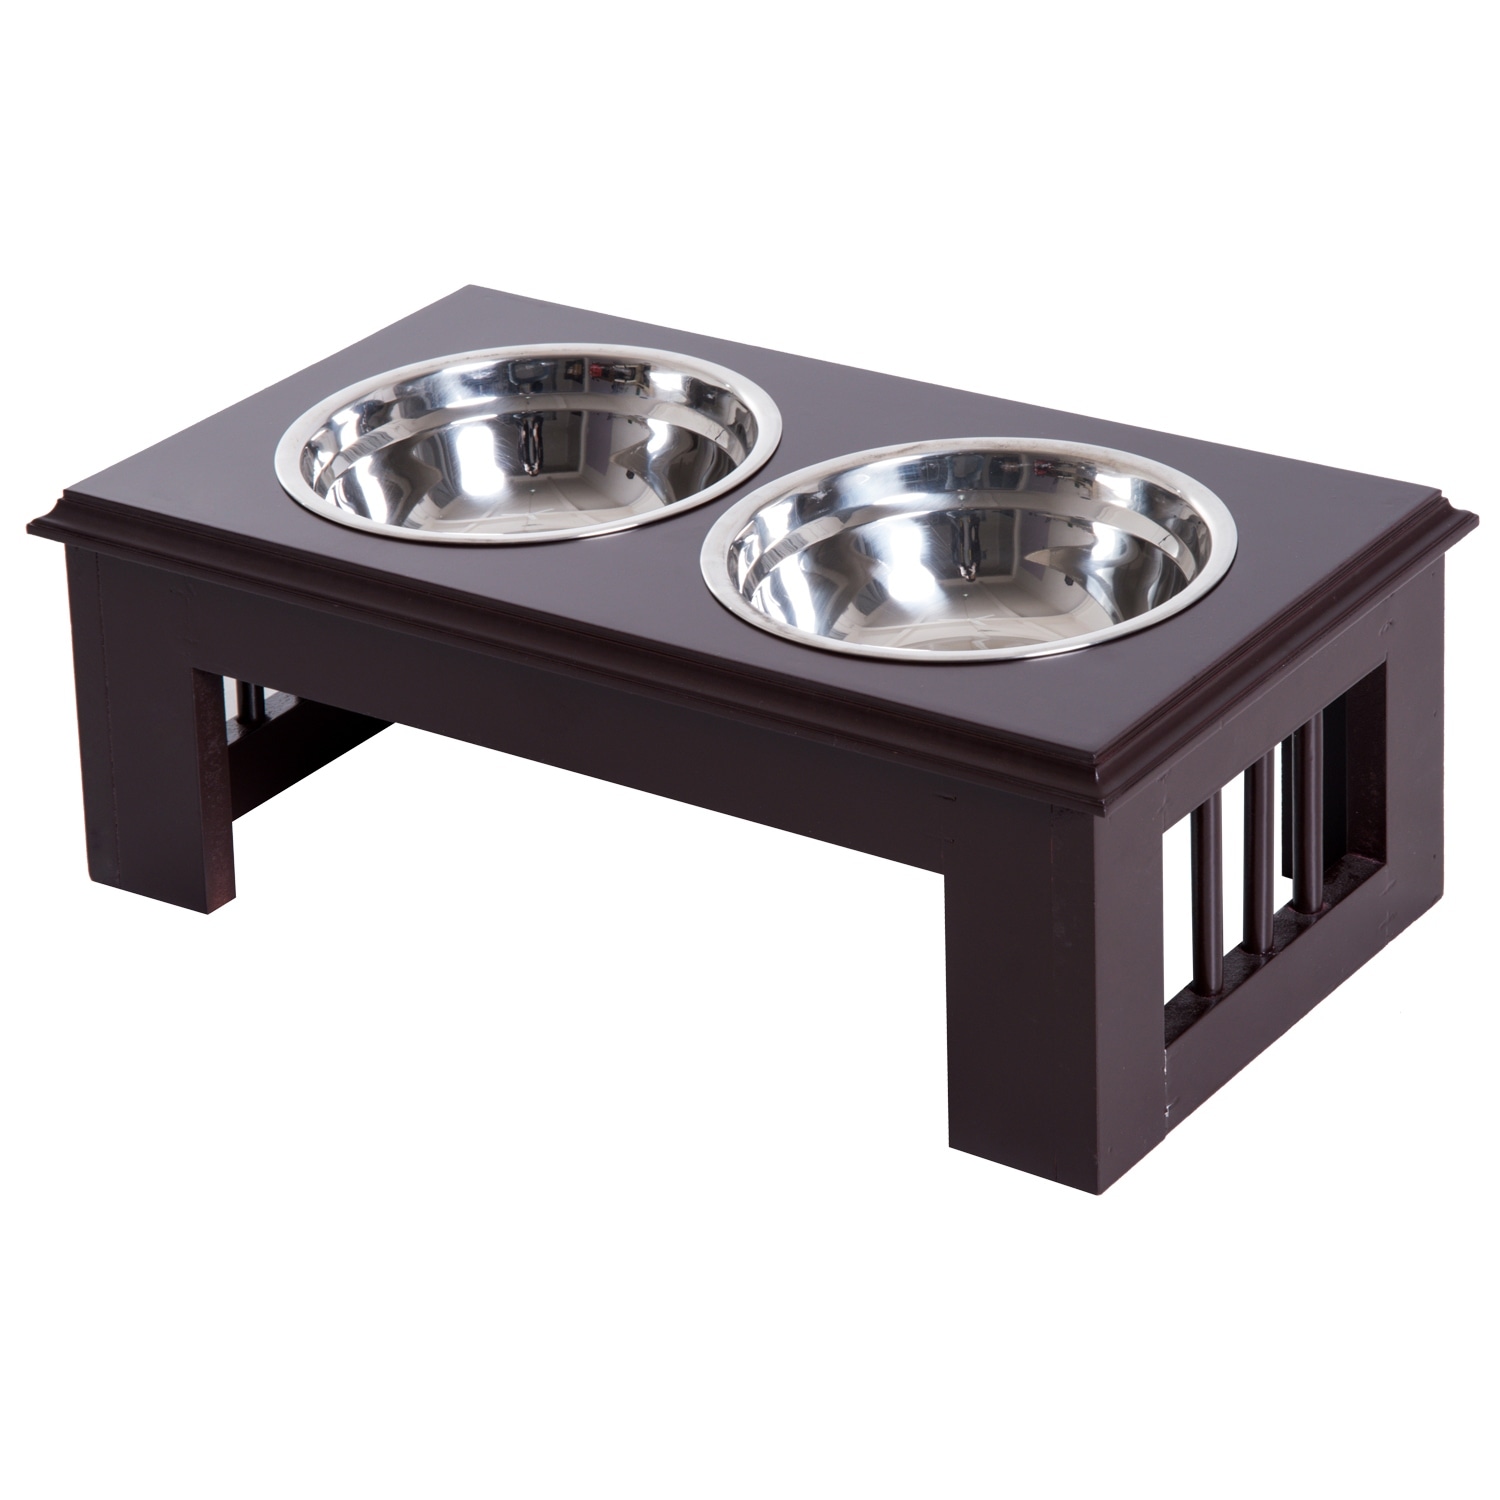 https://ak1.ostkcdn.com/images/products/is/images/direct/adcb6bb1a19d2d496e6cb968c2ce1ff0700131ca/PawHut-17%22-Dog-Feeding-Station-with-2-Food-Bowls%2C-White.jpg